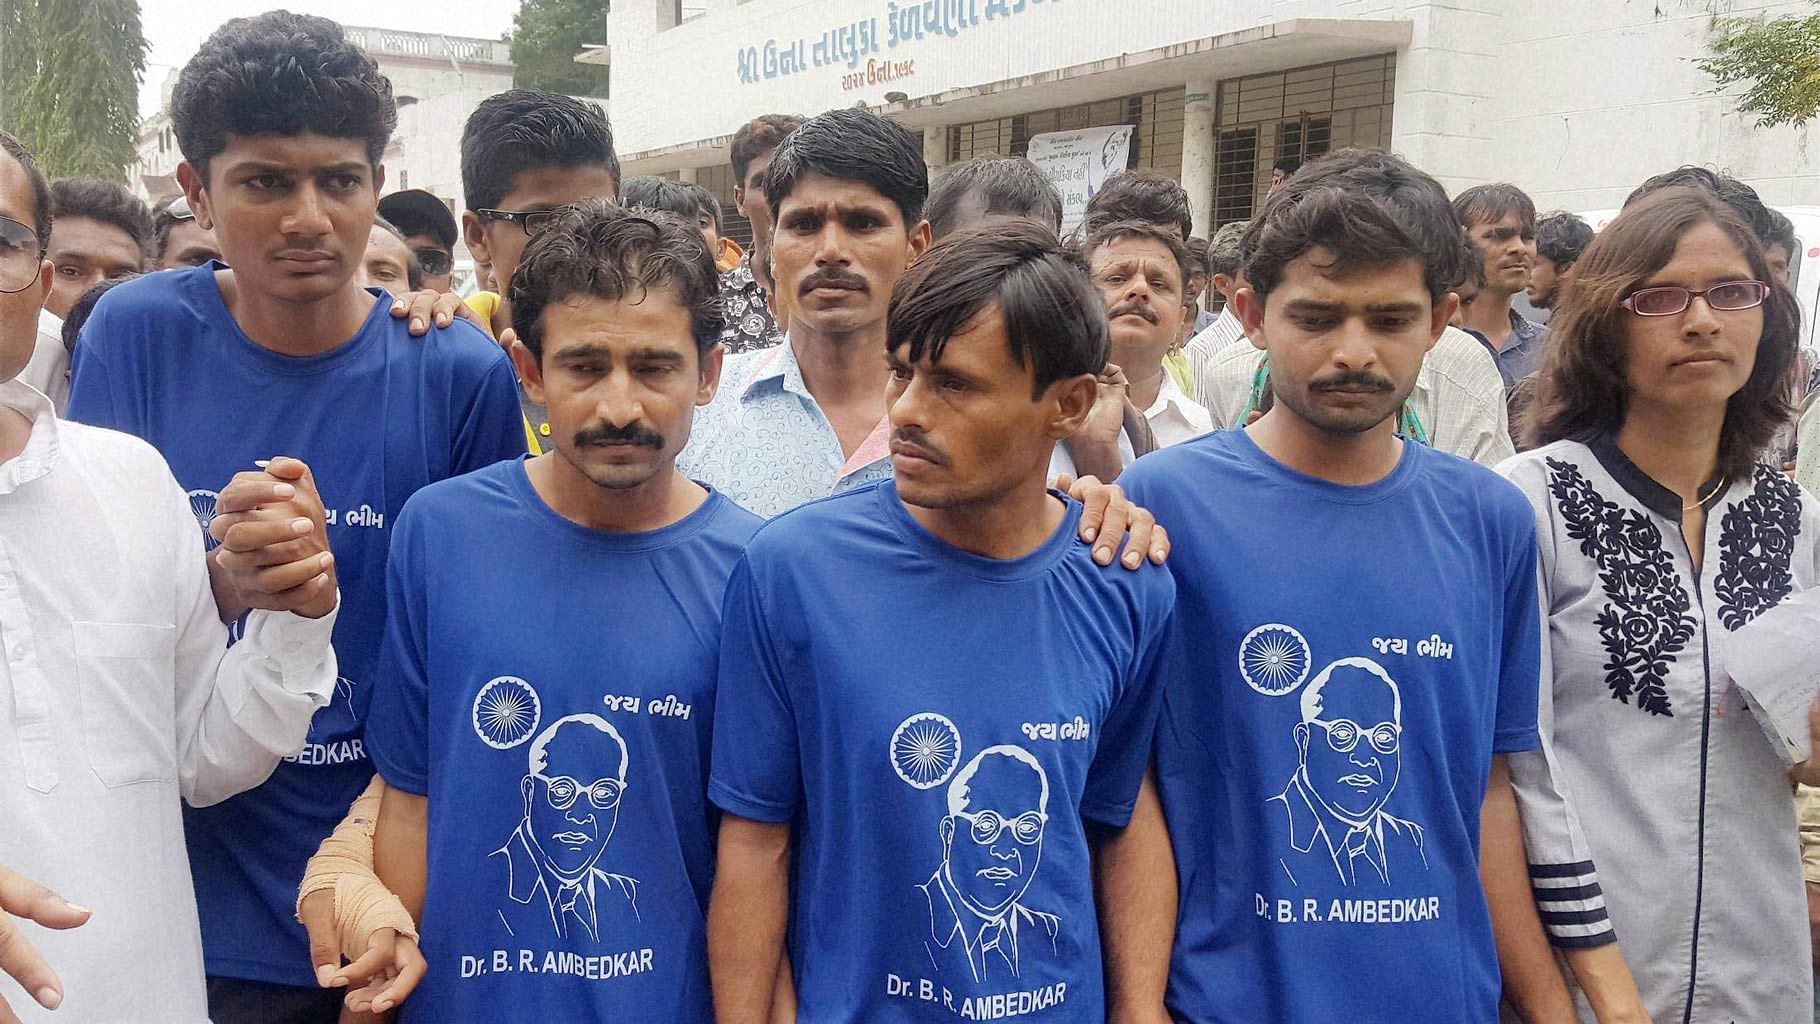 Four Dalit men who were attacked by self-proclaimed cow-vigilantes participate in a solidarity rally in Una, Gujarat on 15 August 2016.&nbsp;